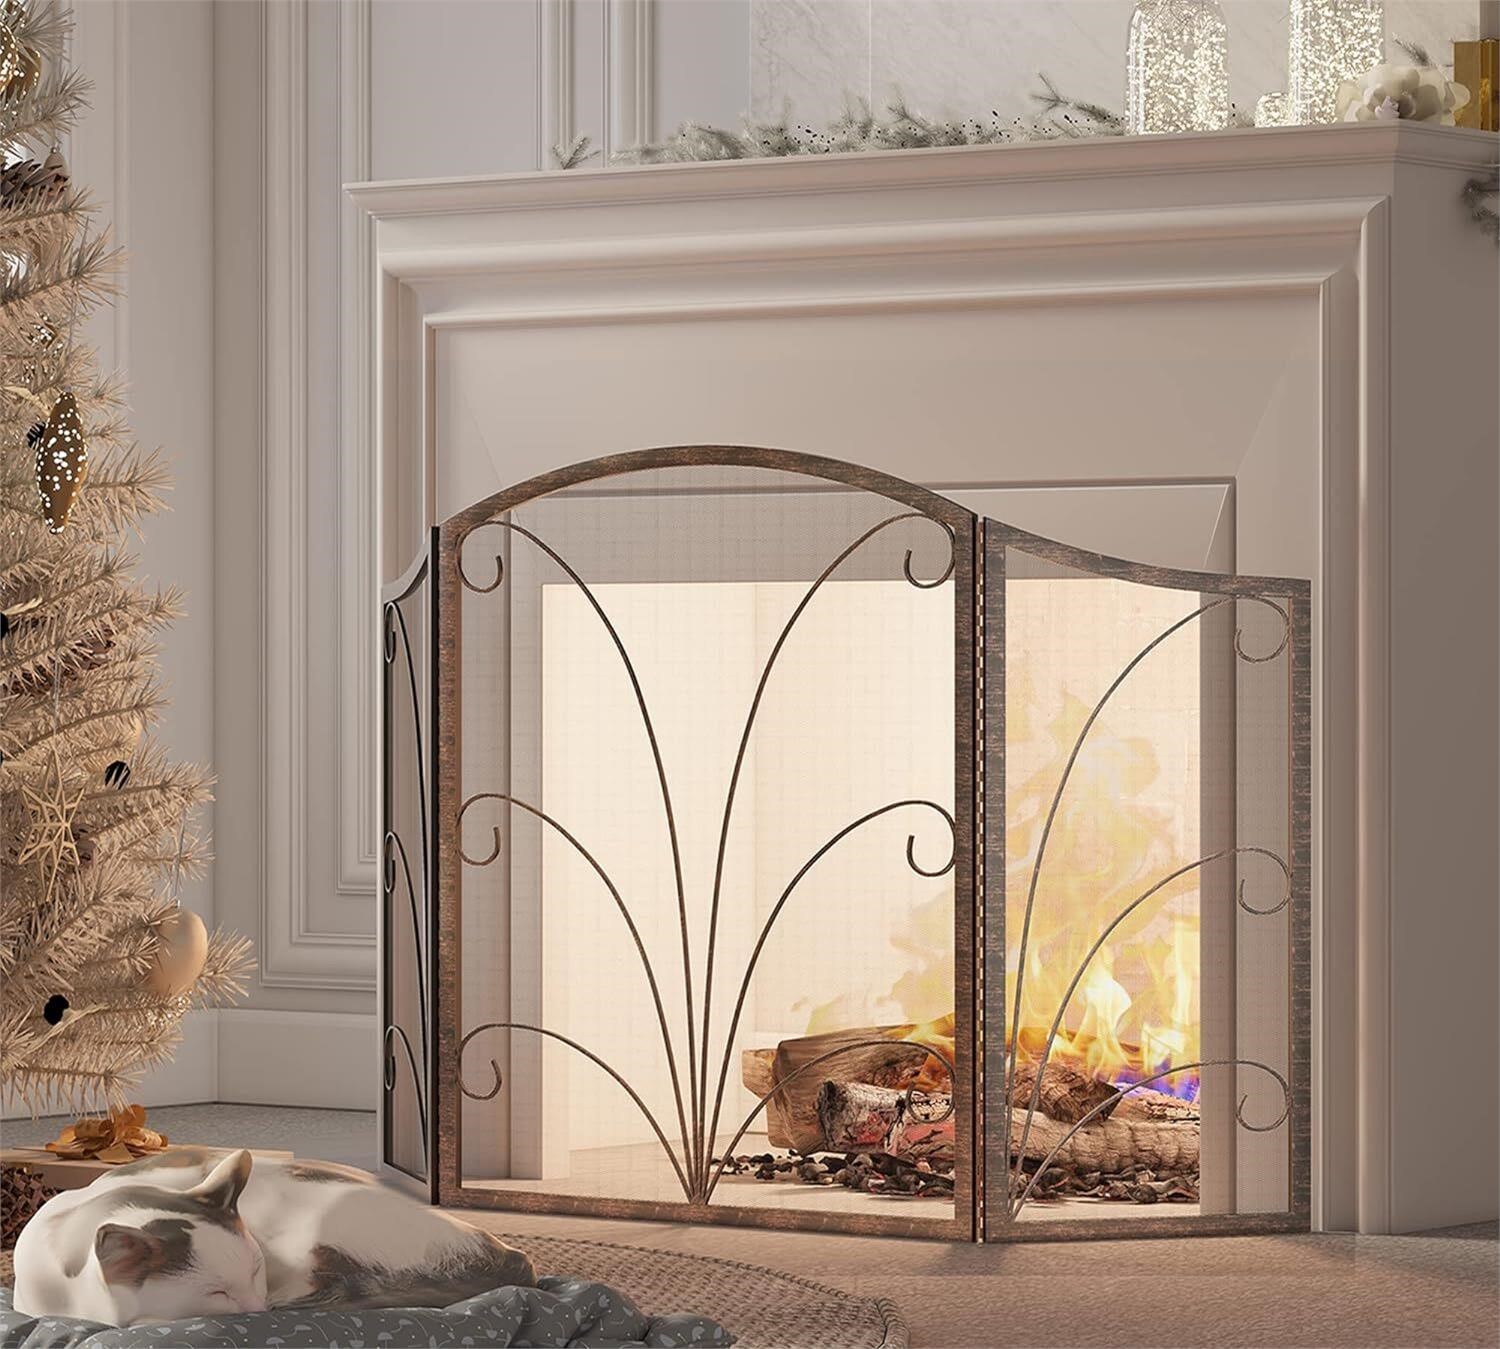 Kingson 3-Panel Arched Fireplace Screen